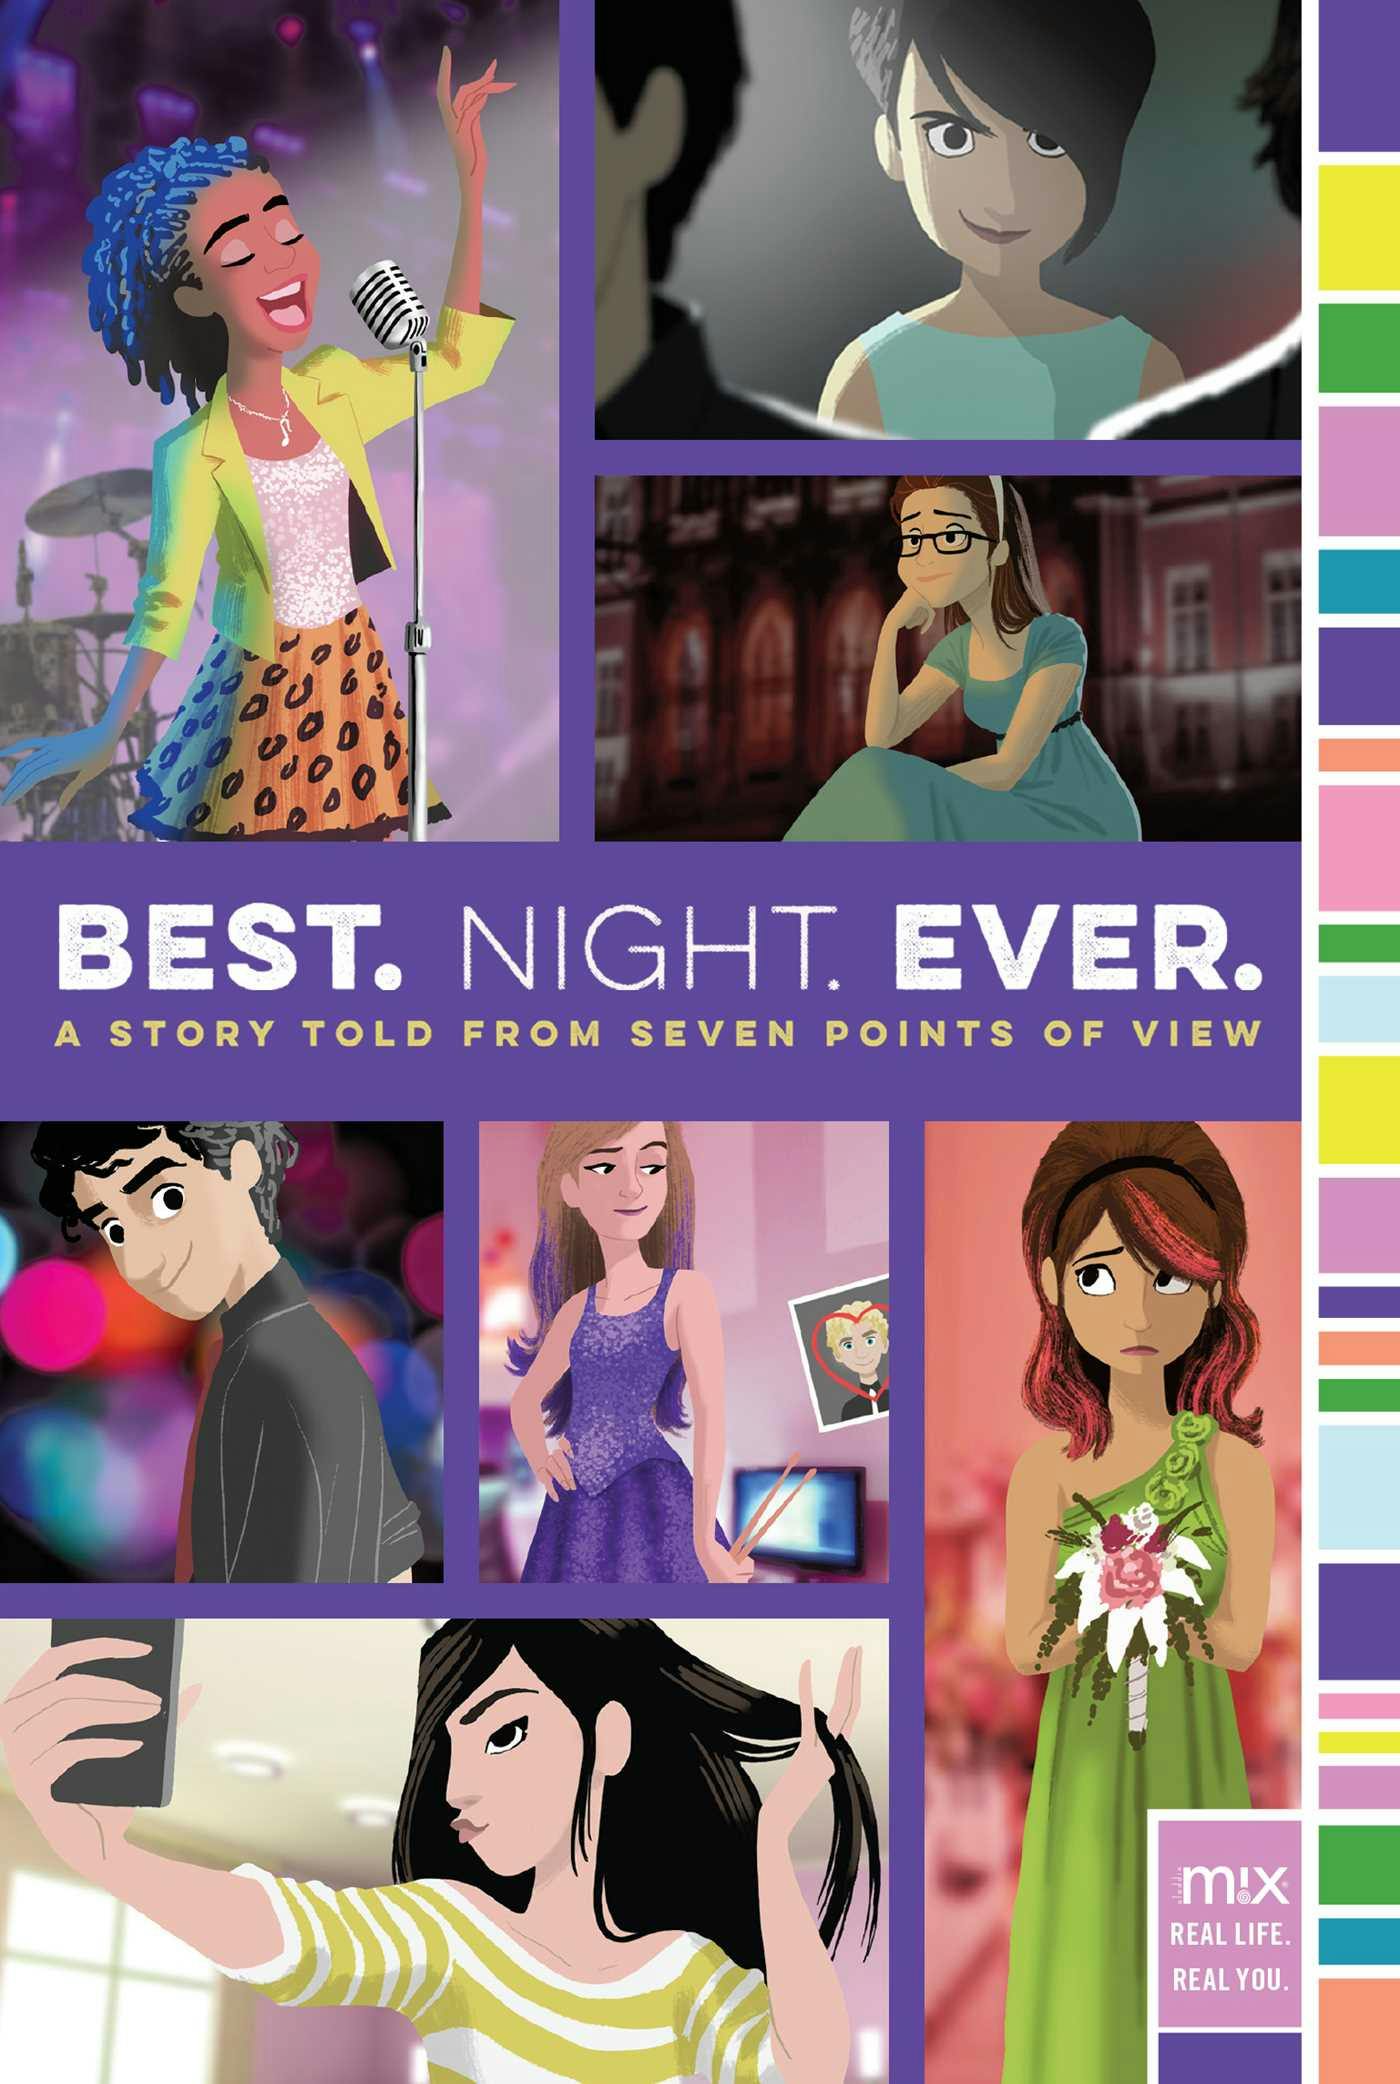 Best. Night. Ever.: A Story Told from Seven Points of View - Alison Cherry, Rachele Alpine, Stephanie Faris, Ronni Arno, Gail Nall, Jen Malone, Dee Romito